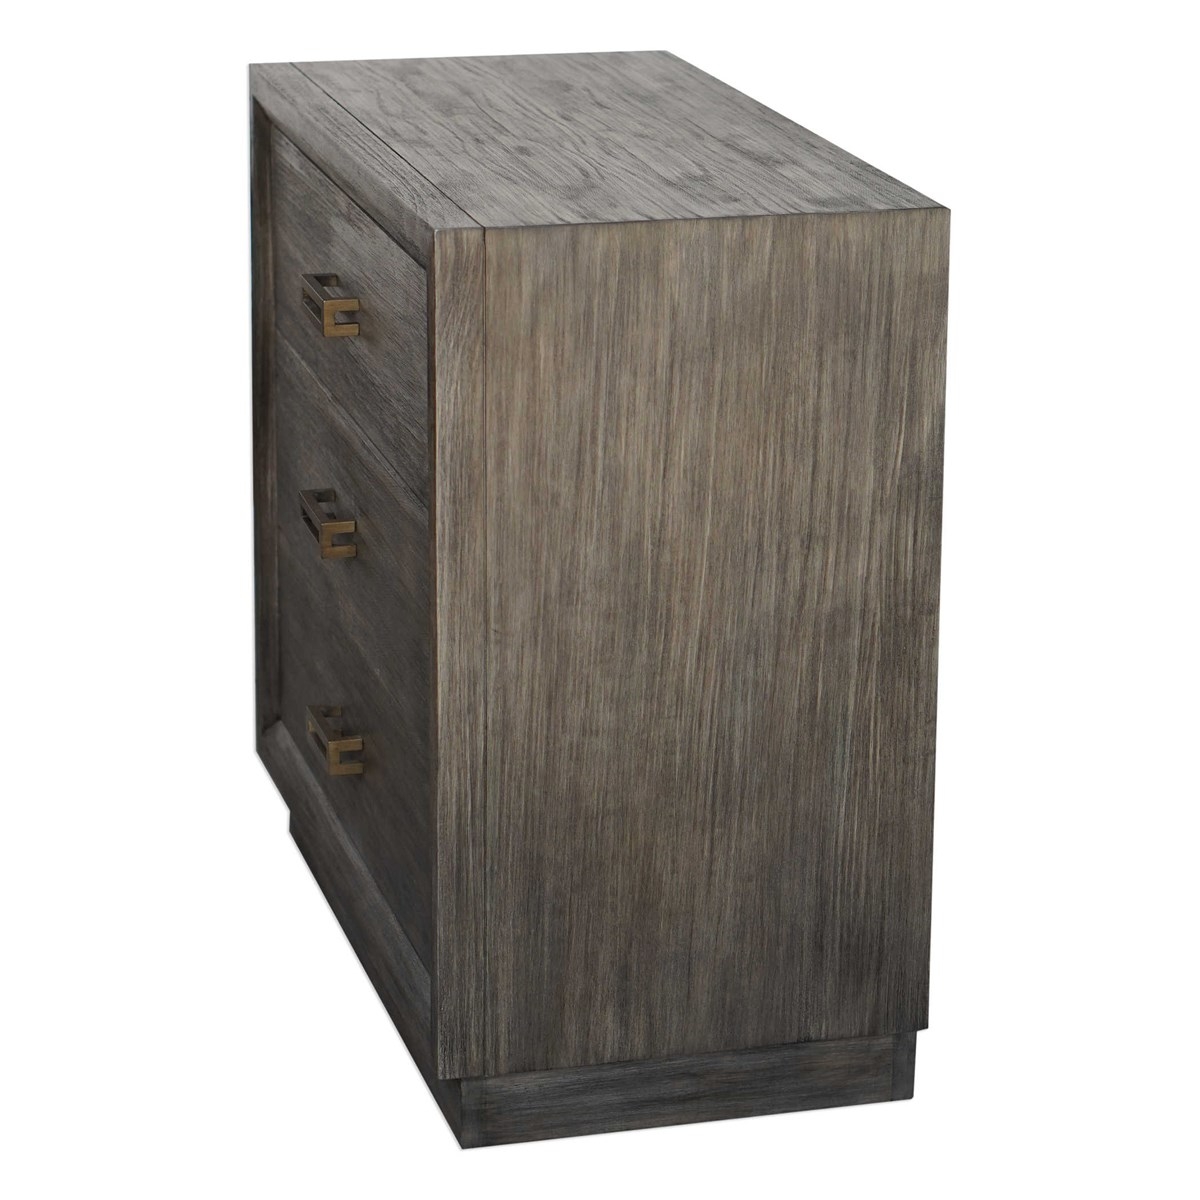 THERON ACCENT CHEST - Image 1